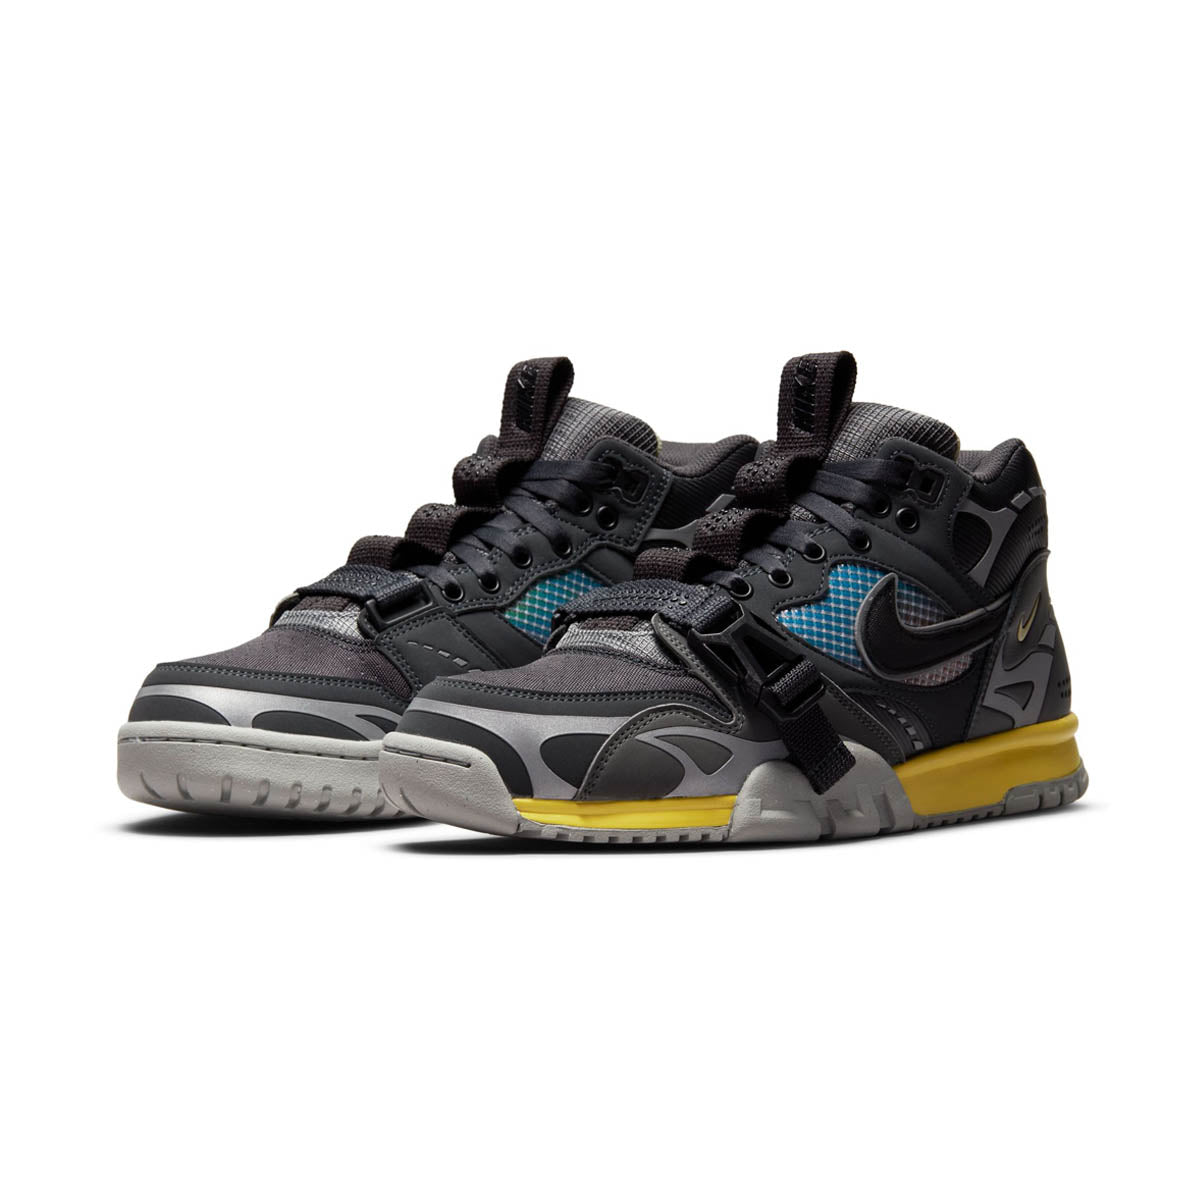 Nike Air Trainer 1 SP Shoes - Shoes